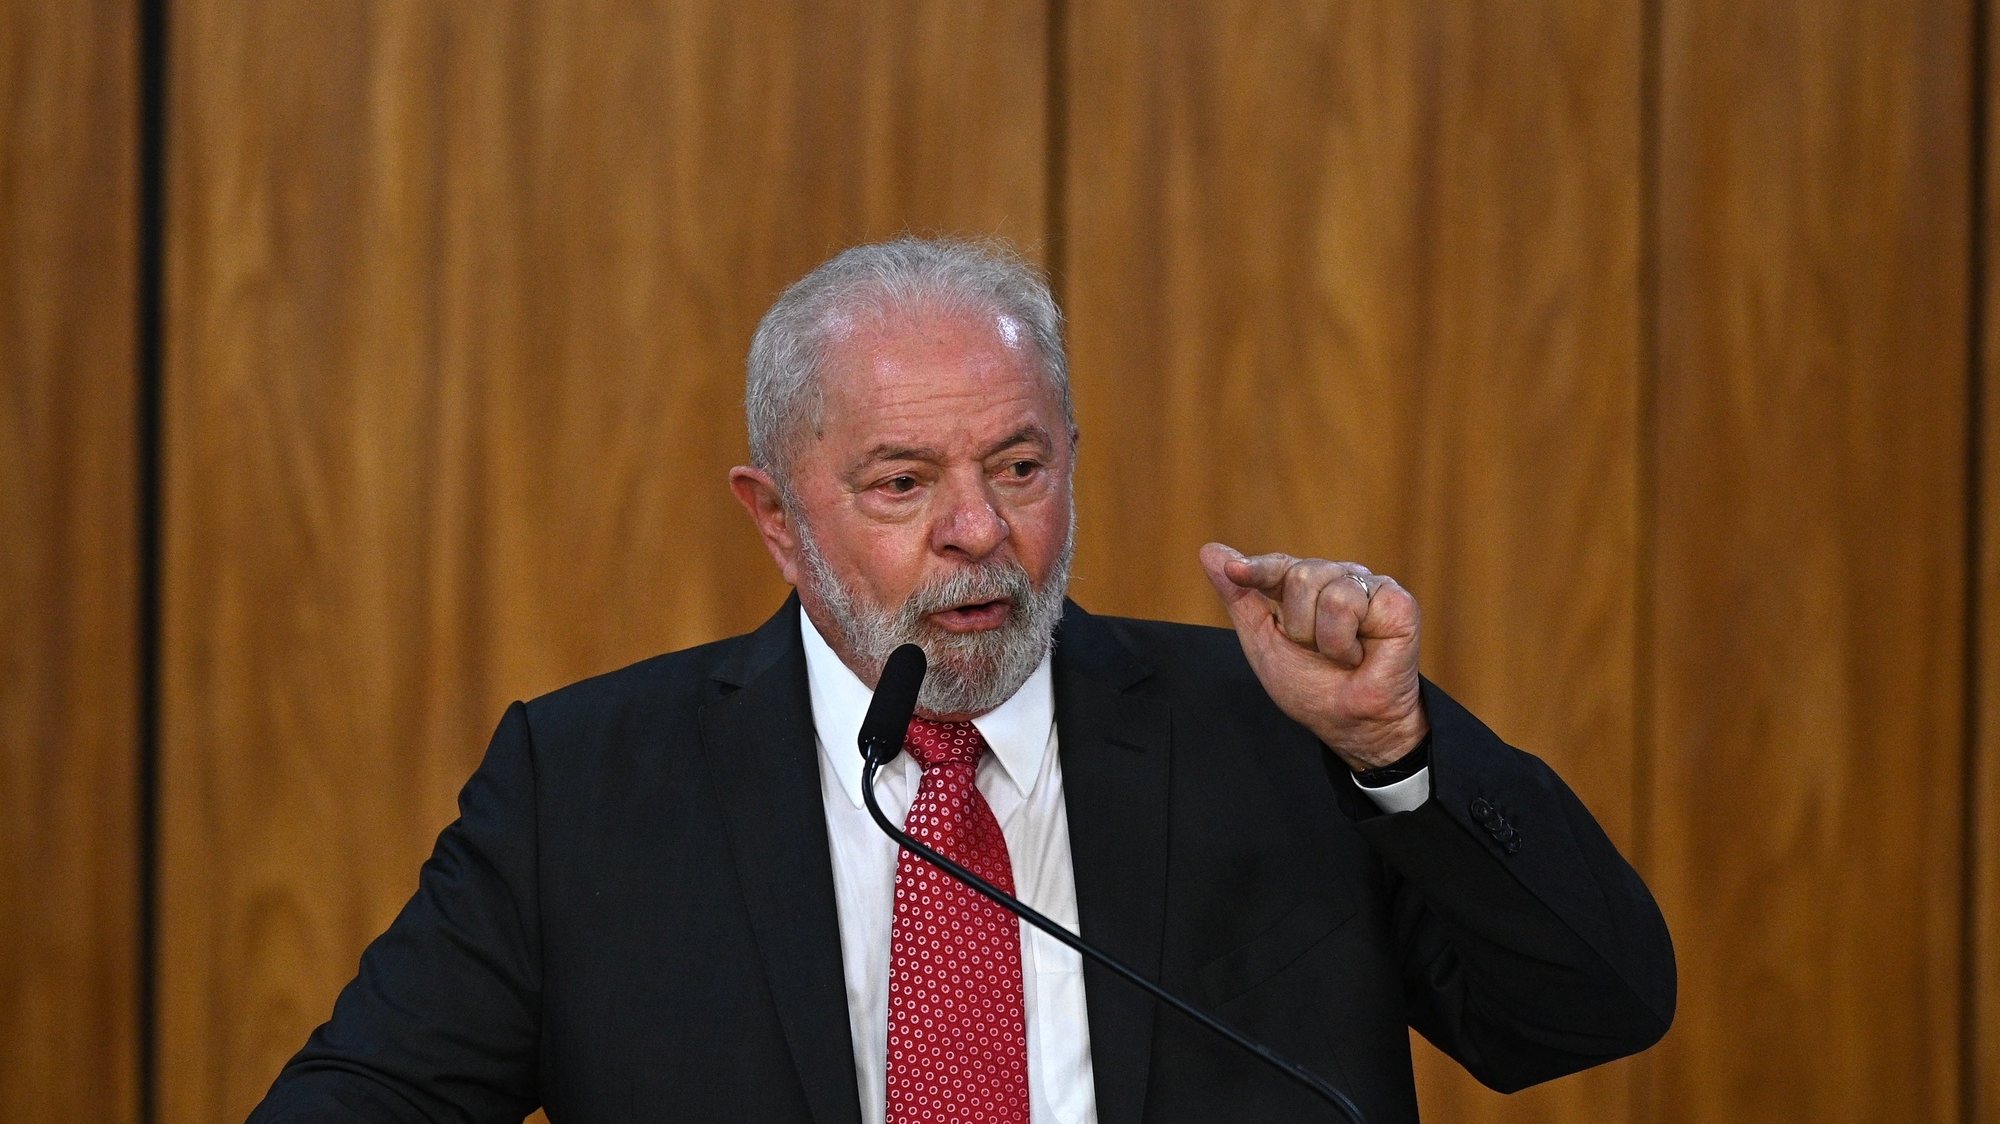 epa10440561 The President of Brazil, Luiz Inácio Lula da Silva, speaks during a press conference after a meeting with German Chancellor Olaf Scholz (not pictured), at the Planalto Palace, in Brasilia, Brazil, 30 January 2023.  On the agenda that Lula and Scholz will discuss there is a wide range of issues, but cooperation in environmental matters and the resumption of German financial support for programs to protect the Amazon stand out.  EPA/Andre Borges